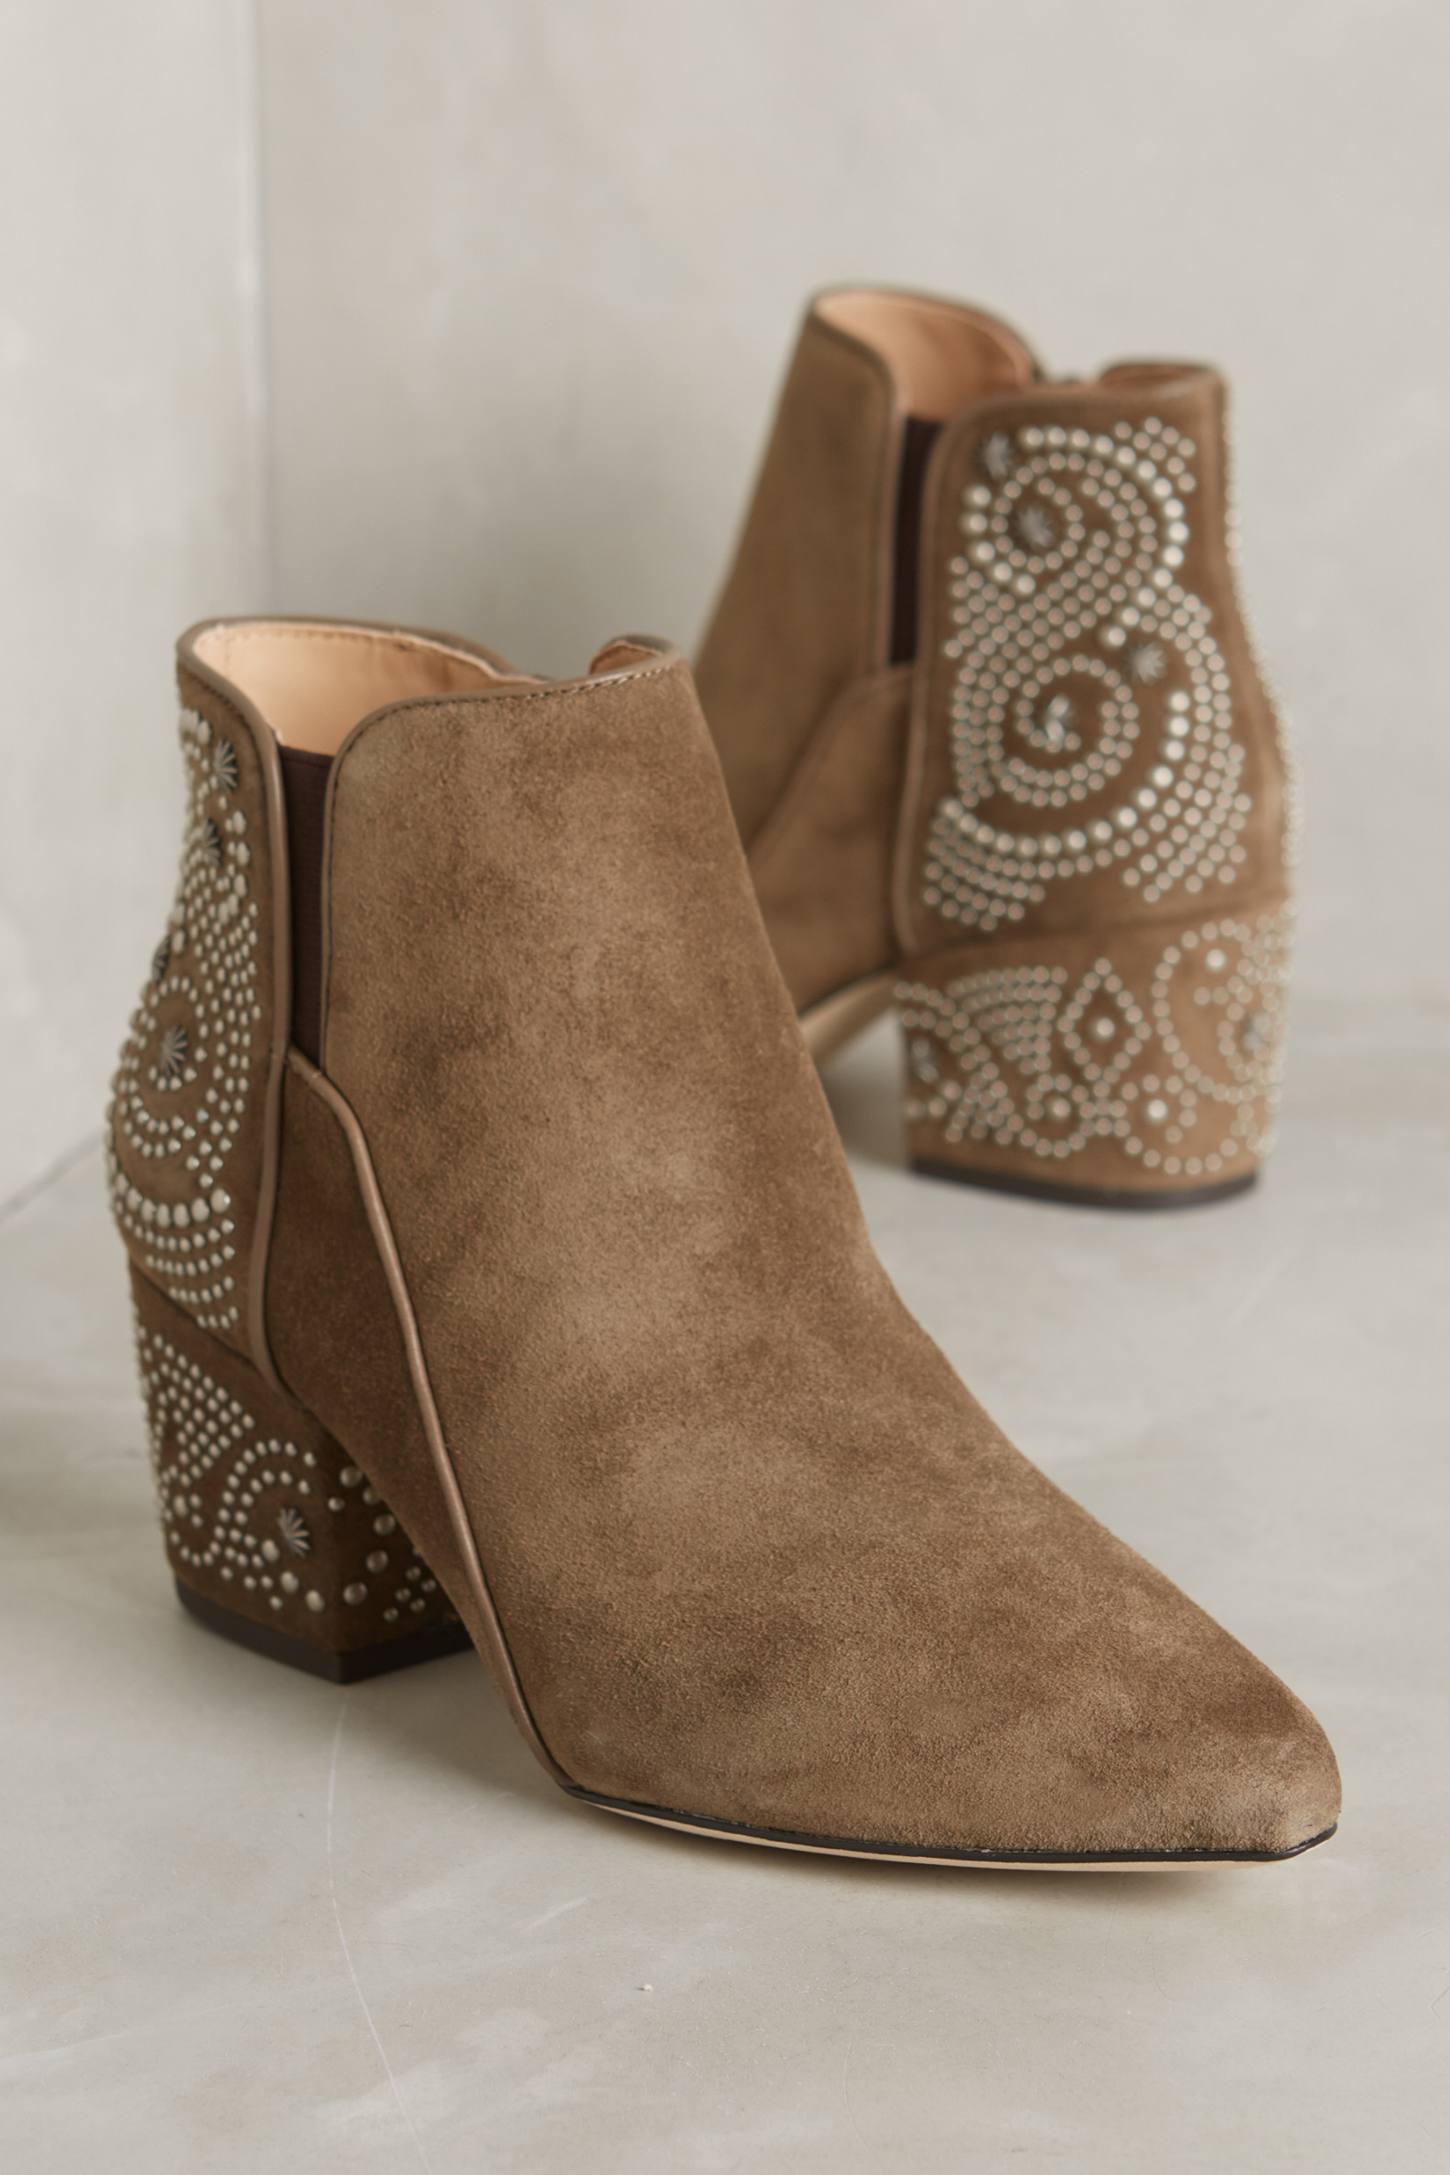 Cynn Booties by Belle by Sigerson Morrison